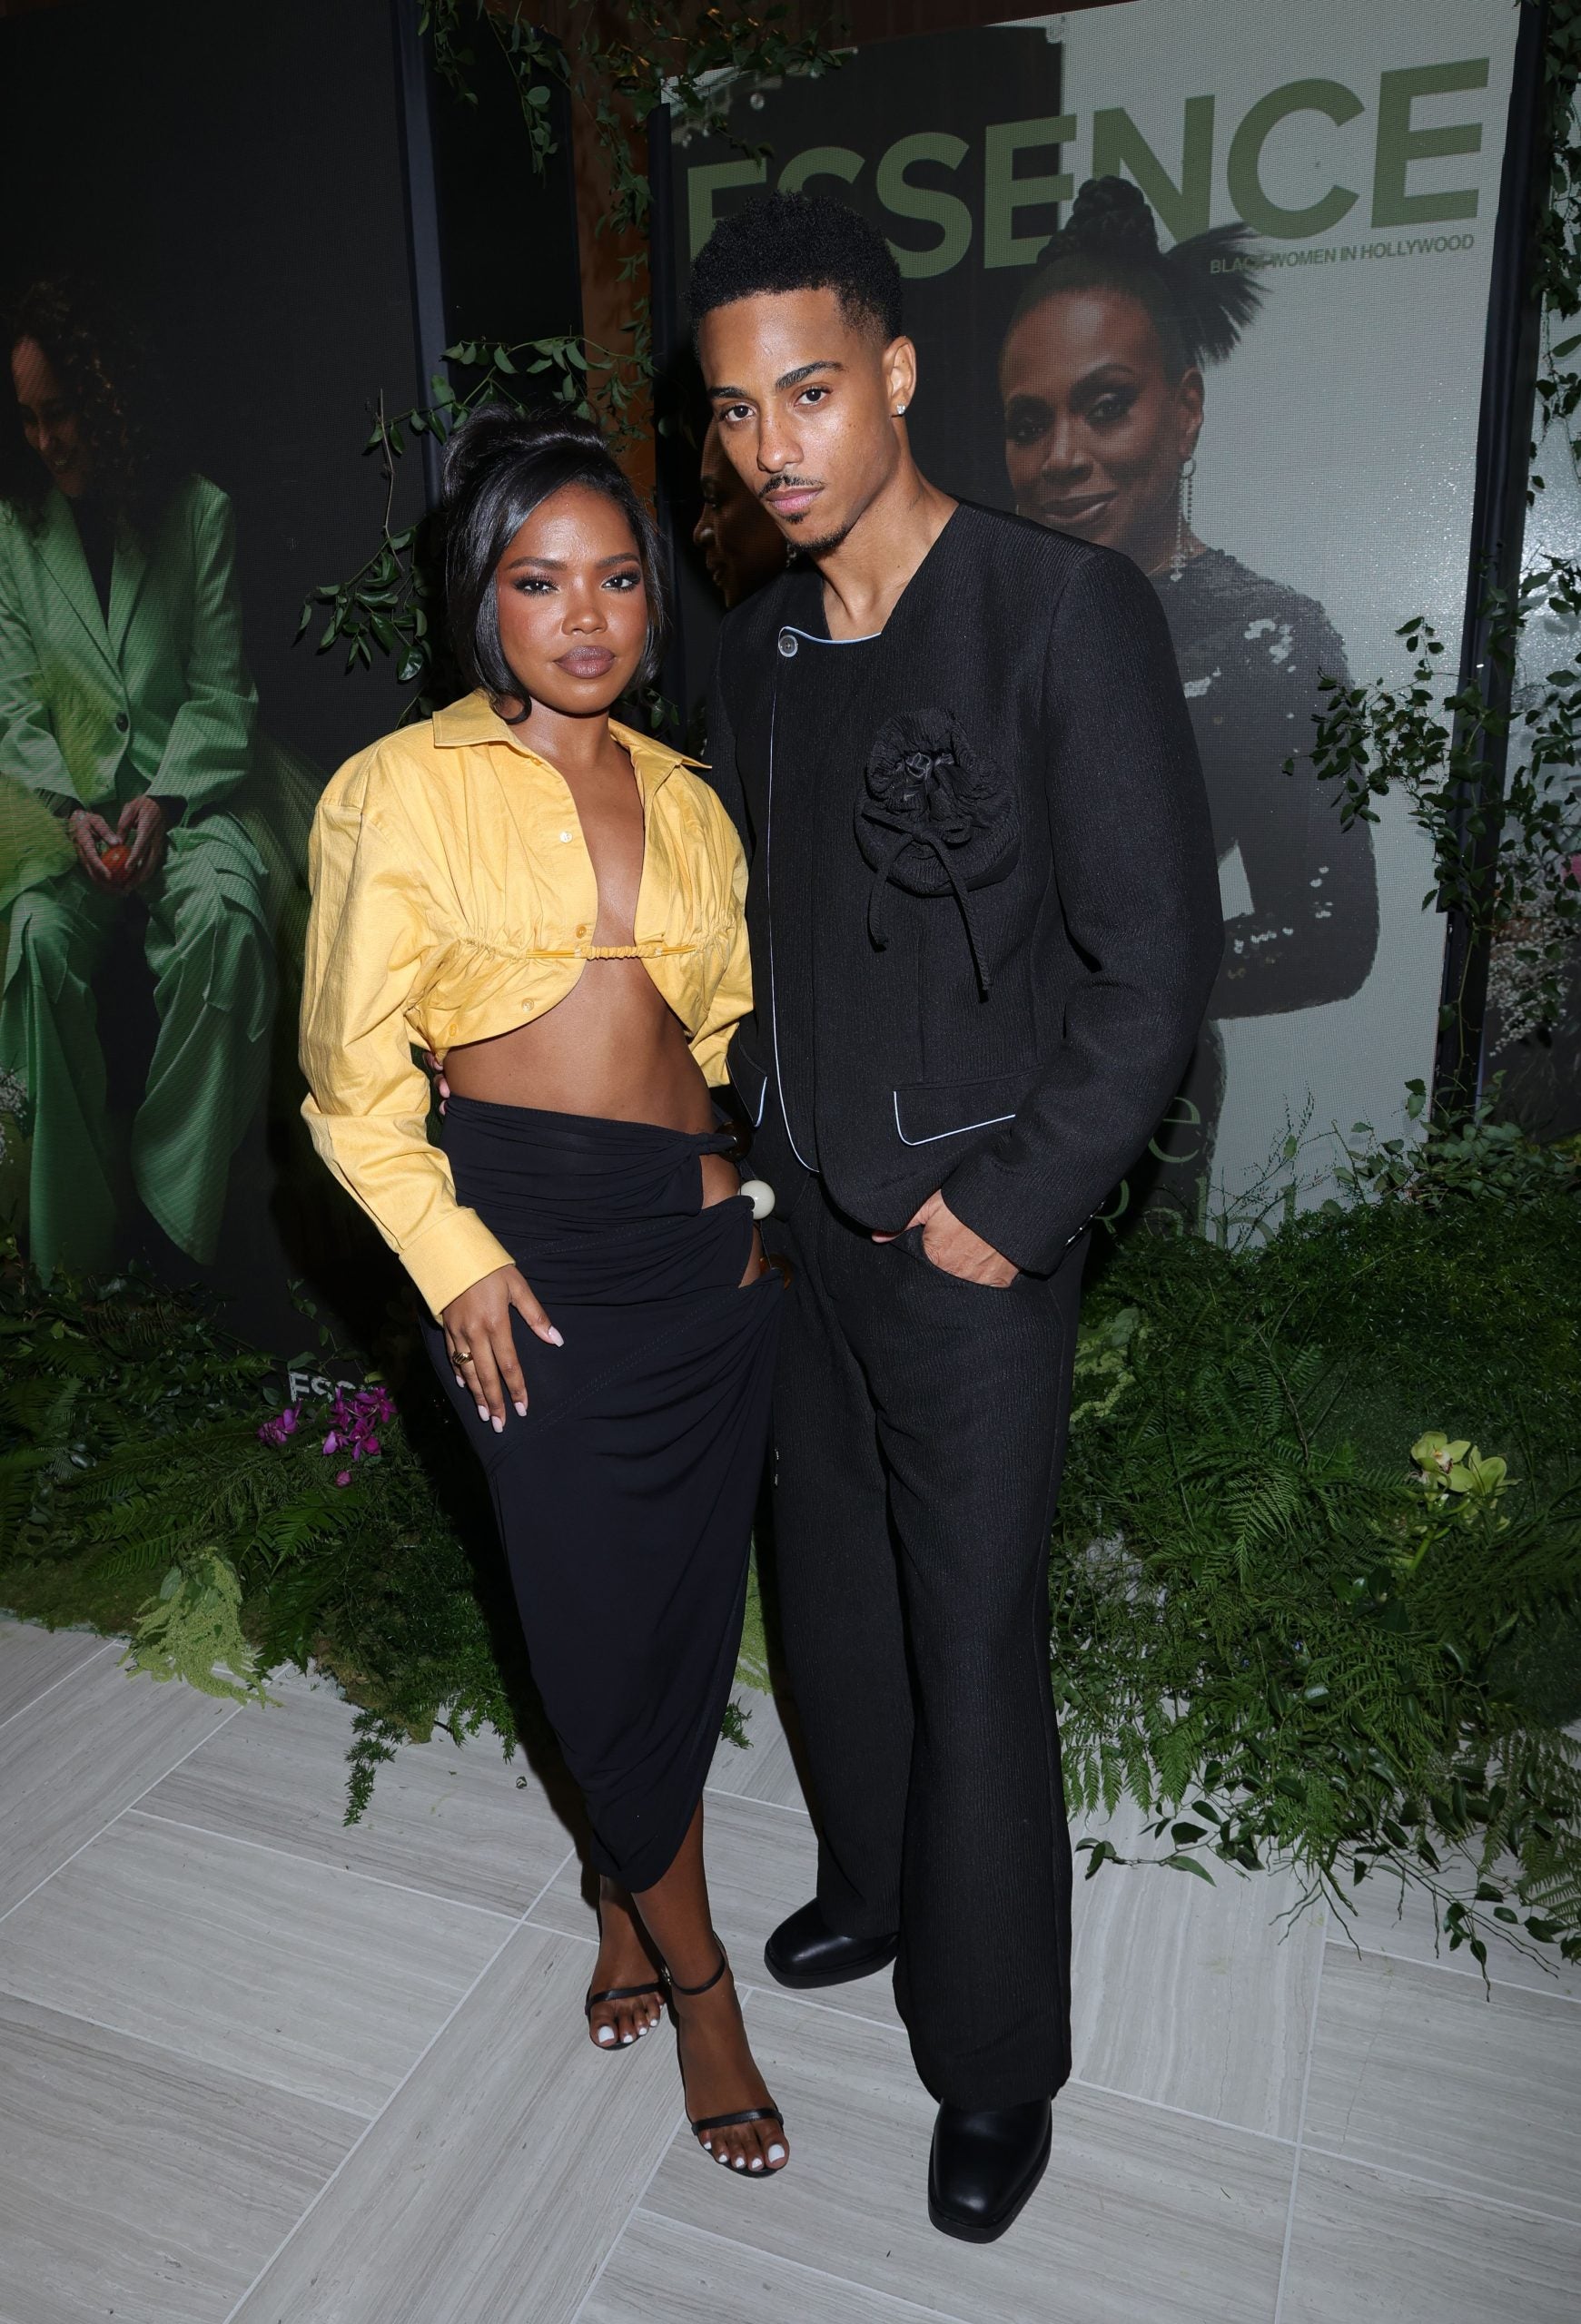 Black Love Was In The Air At The 16th Annual ESSENCE Black Women in Hollywood Awards Luncheon